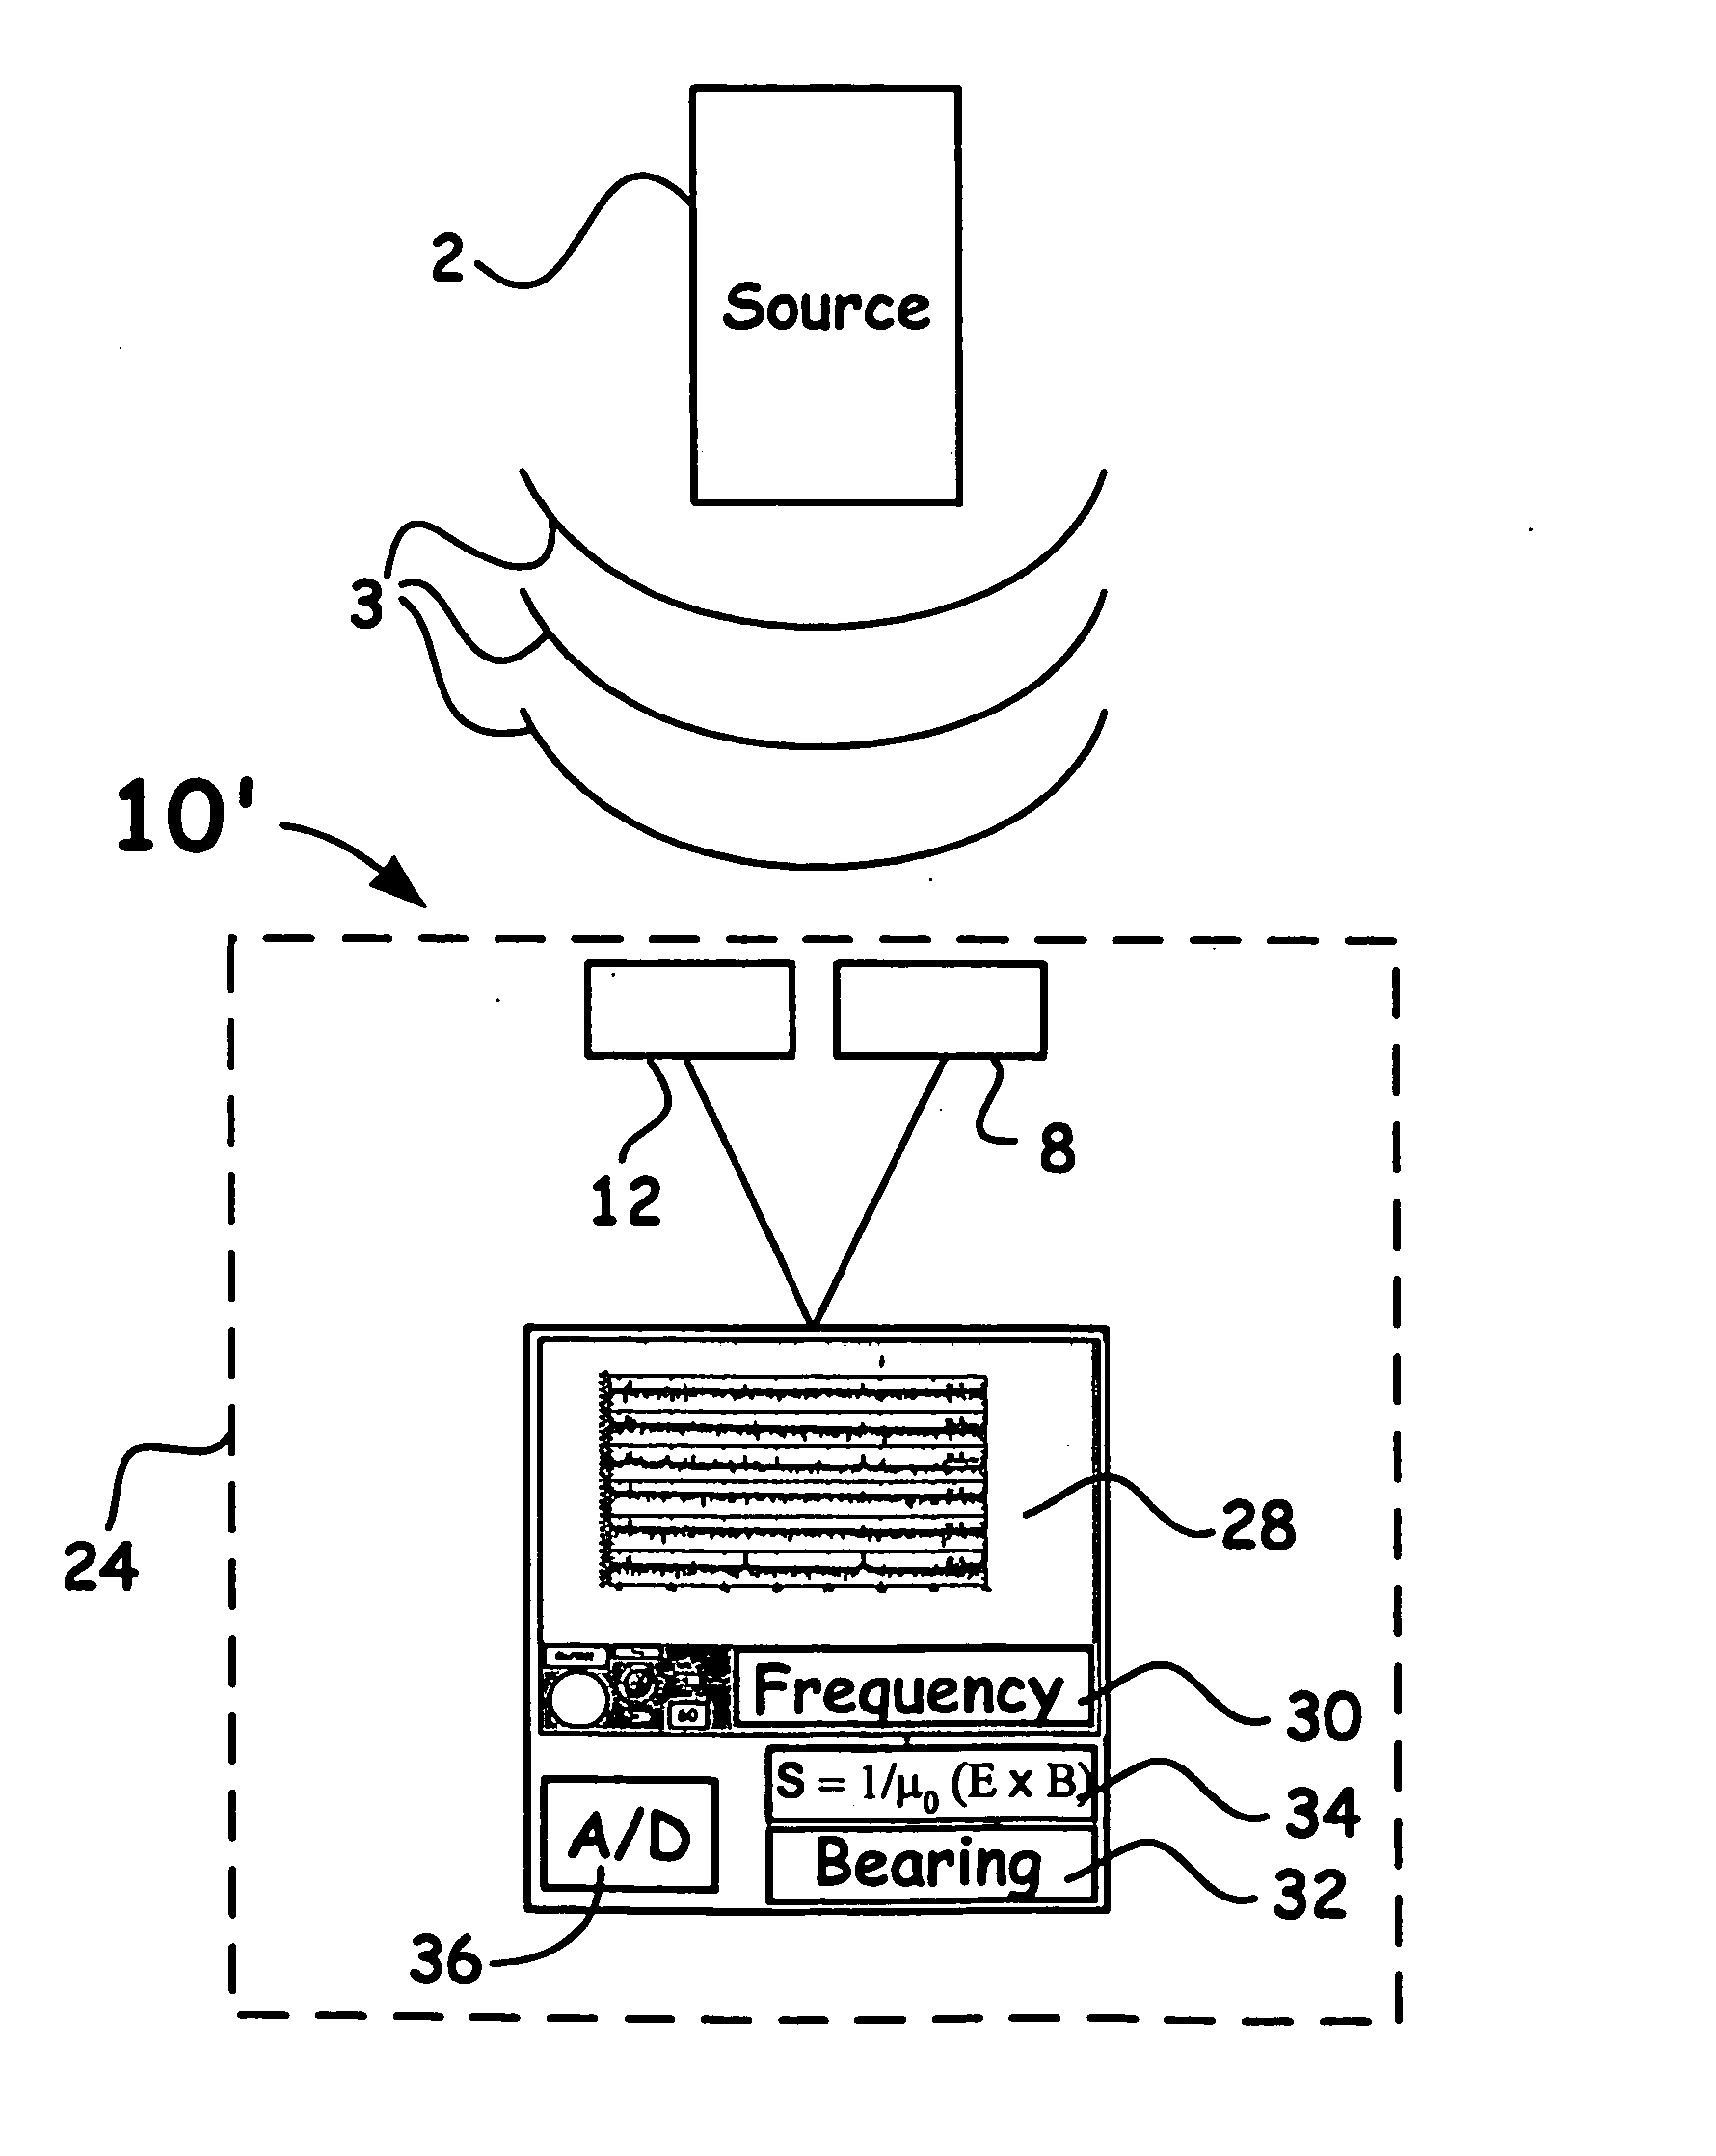 Poynting-vector based method for determining the bearing and location of electromagnetic sources